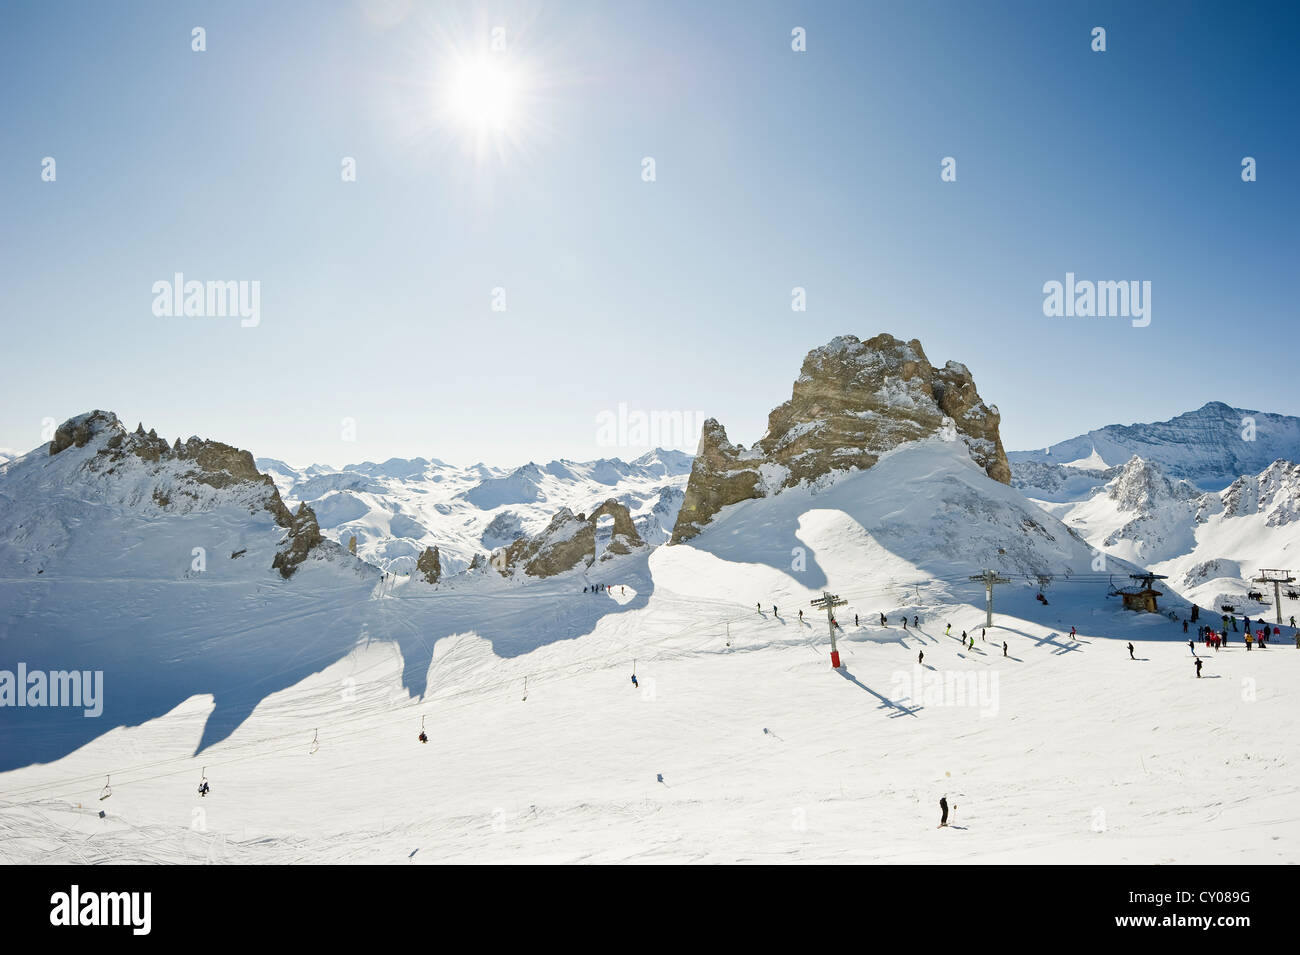 Snow-covered mountain landscape, Aiguille Percee, Tignes, Val d'Isere, Savoie, Alps, France, Europe Stock Photo